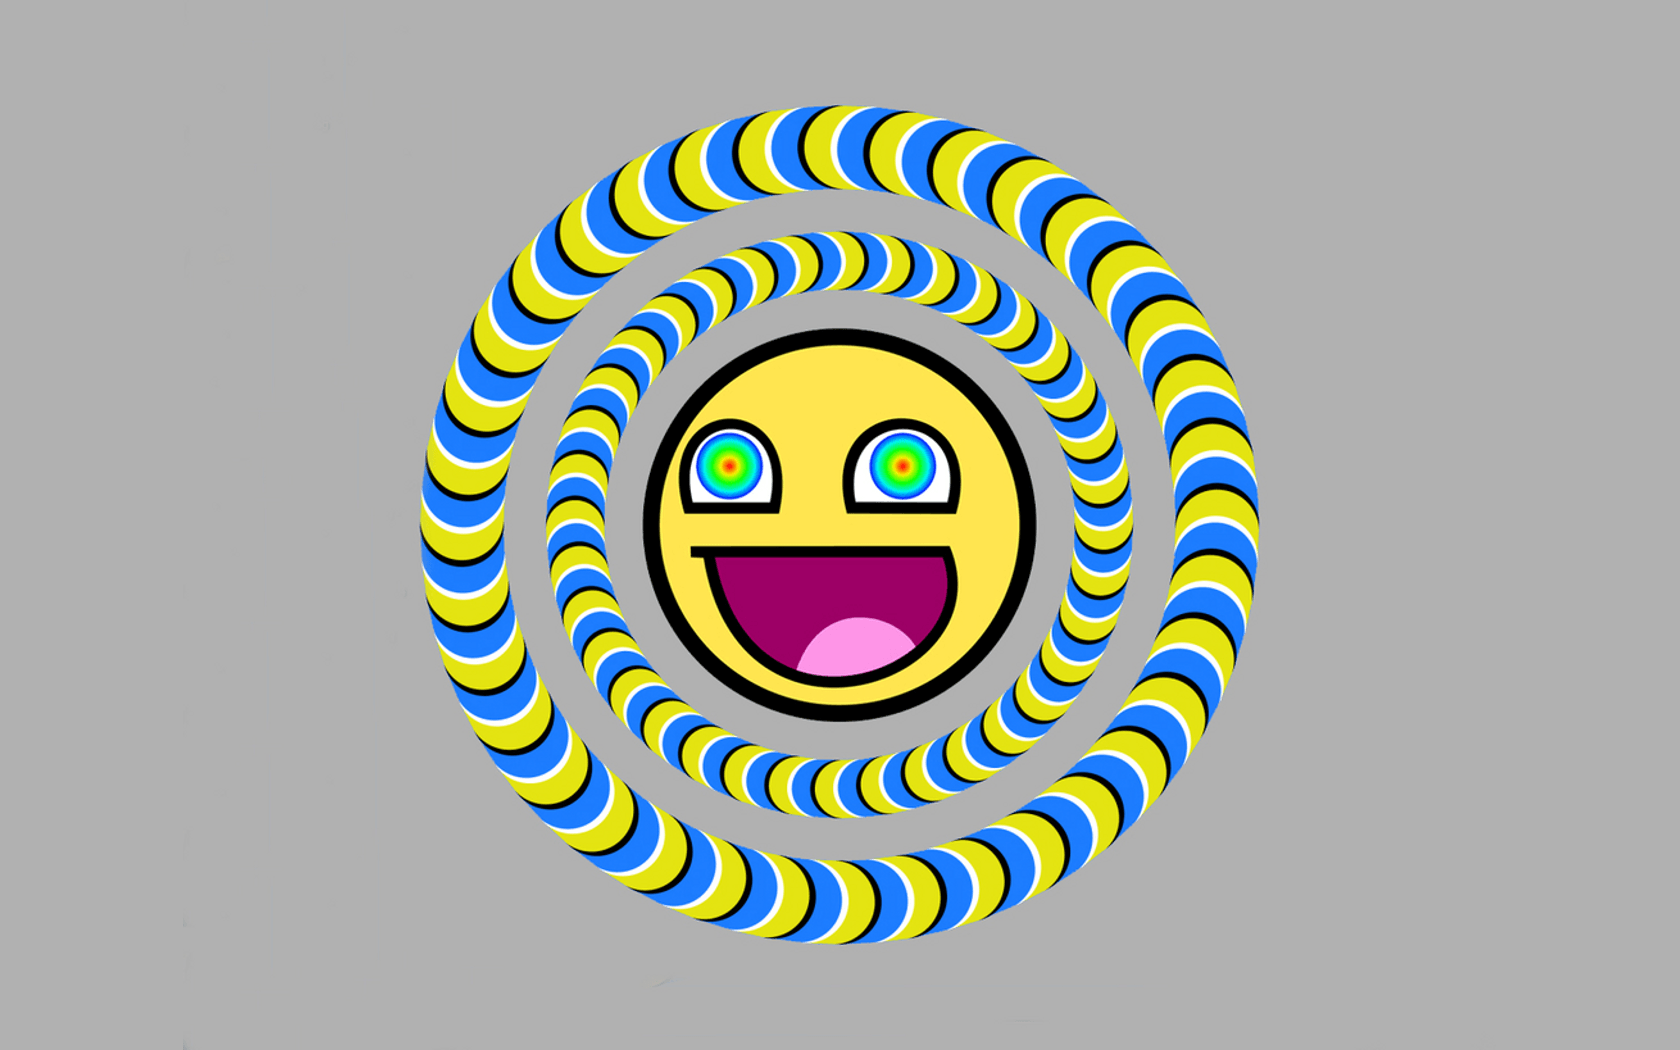 Download Awesome Smiley Face Wallpaper 41020 1680x1050 px High